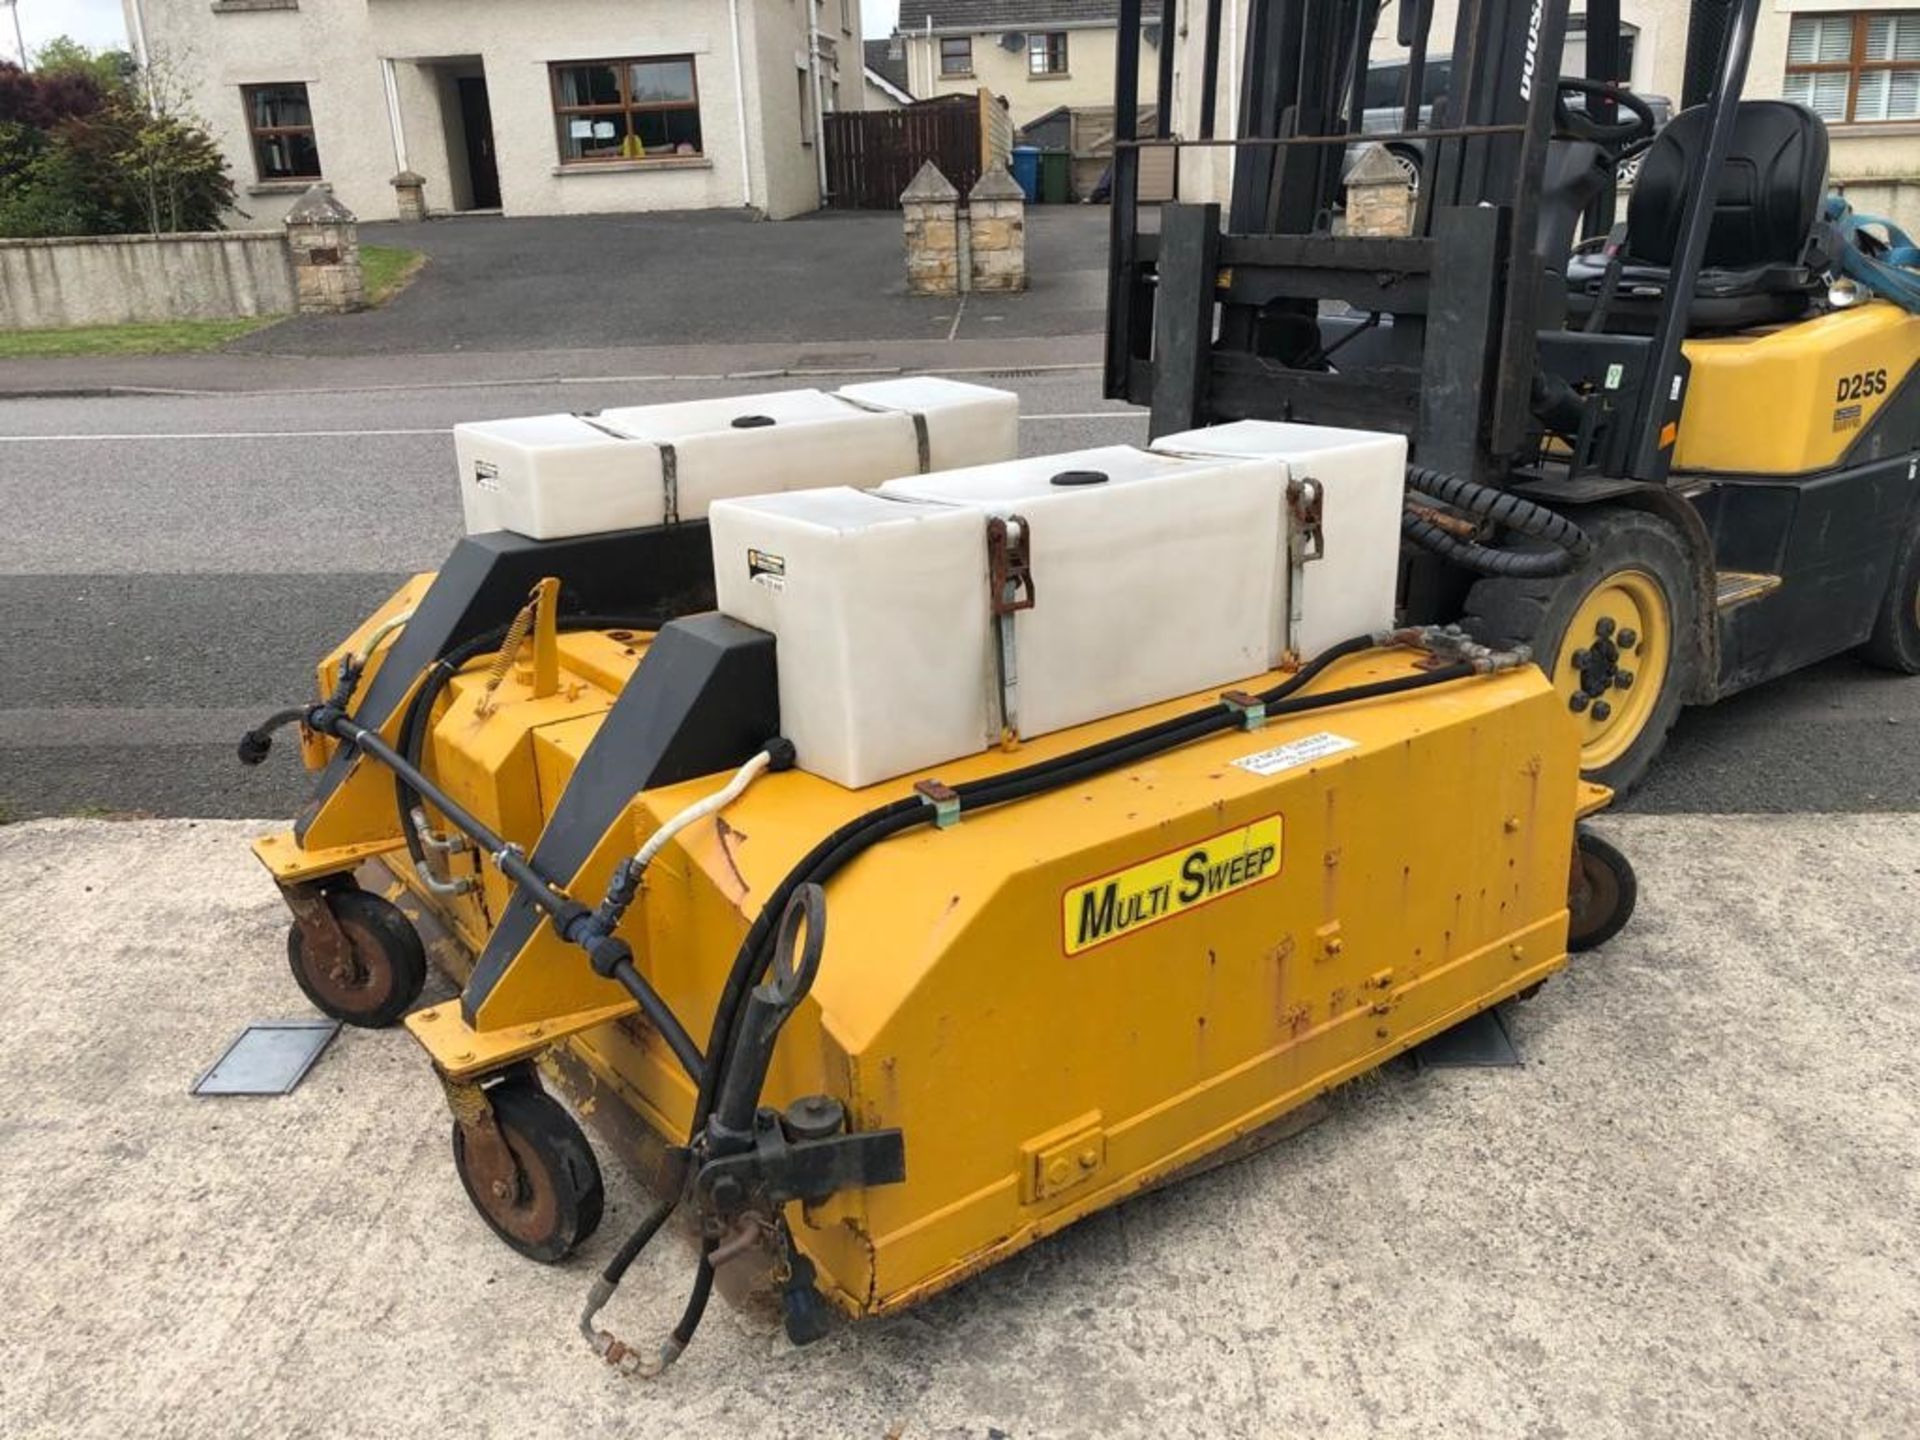 1 x MultiSweep Hydraulic Sweeper / Collector - CL505 - Location: Northern Ireland - UK-Wide Delivery - Image 3 of 8